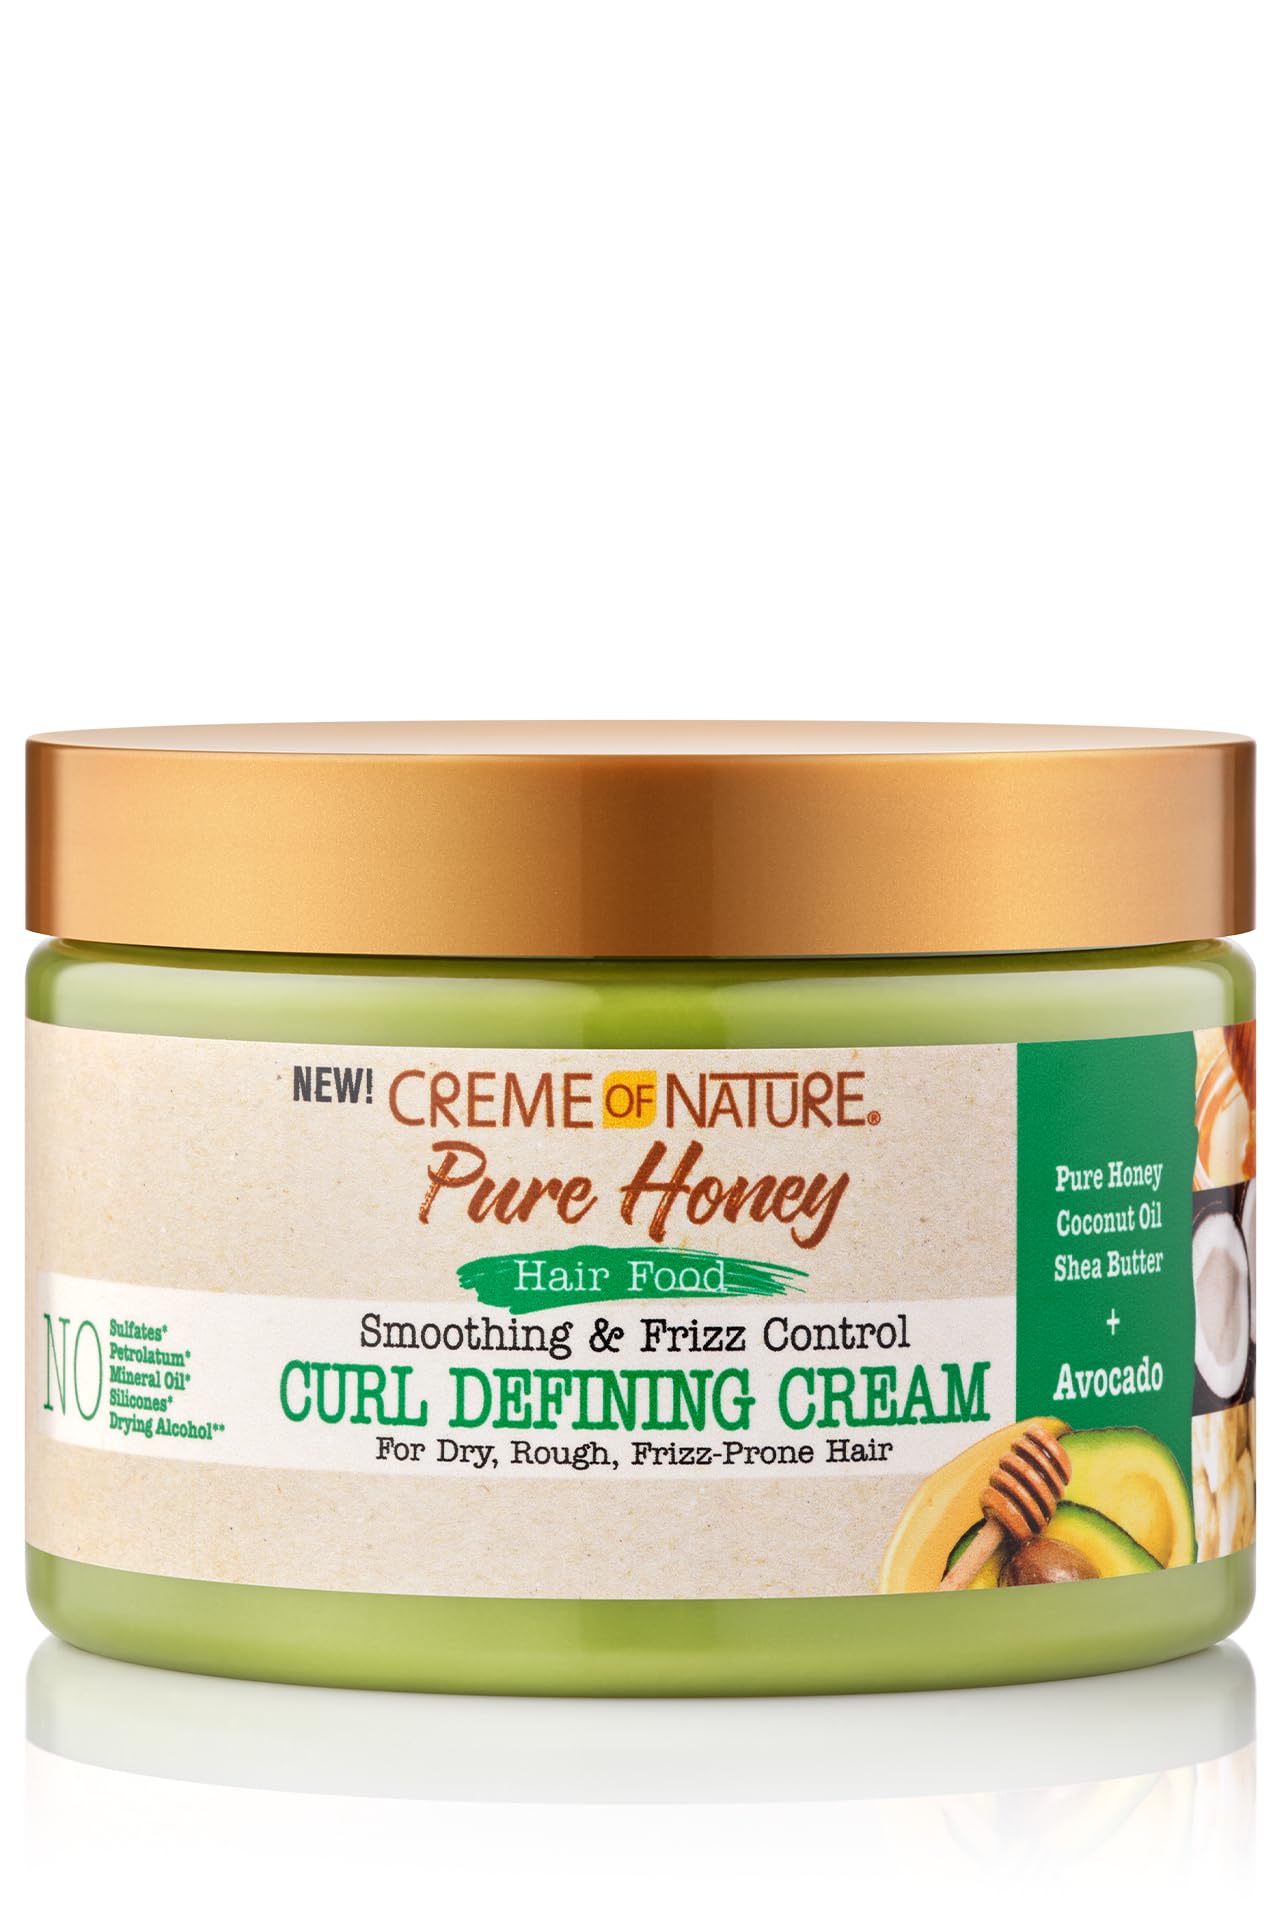 11.5-Oz Creme of Nature Avocado Hair Cream Curl Cream for Curly Hair $6.89 + Free Shipping w/ Prime or on $35+